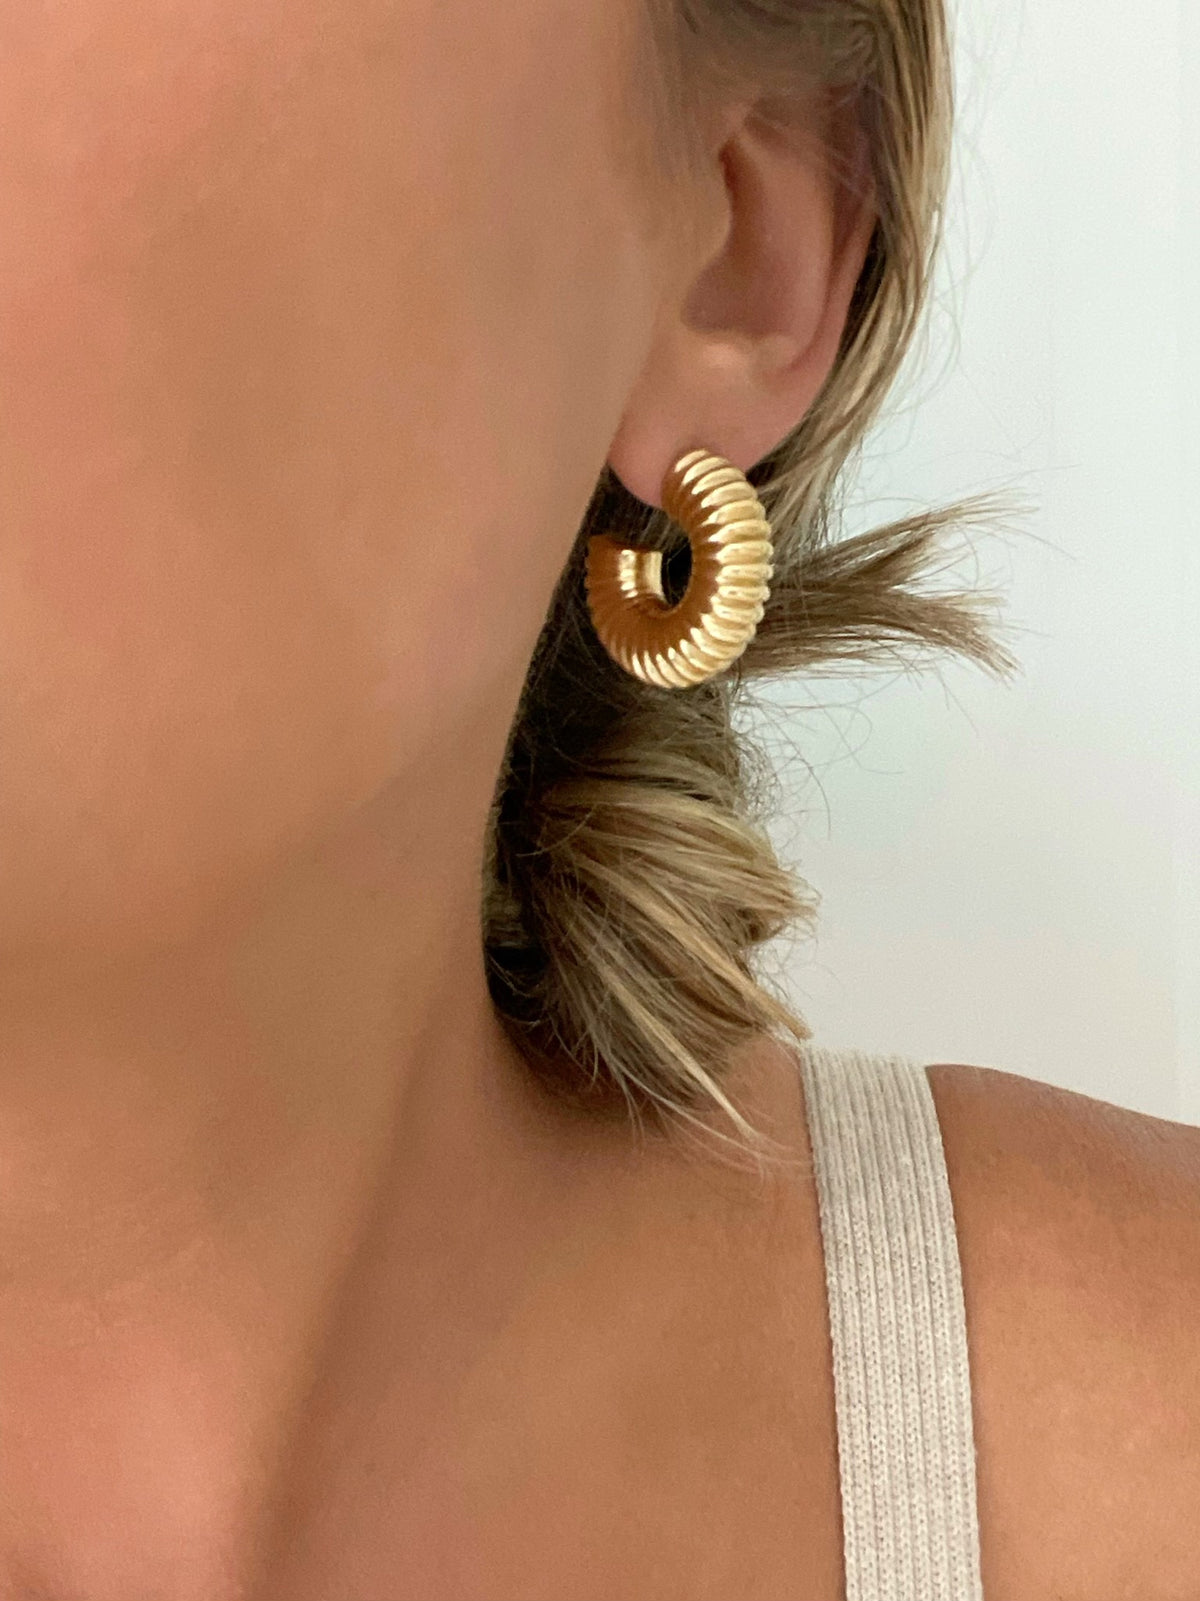 Chunky gold hoop earrings with ribbed texture, by Dylan Rae Jewelry